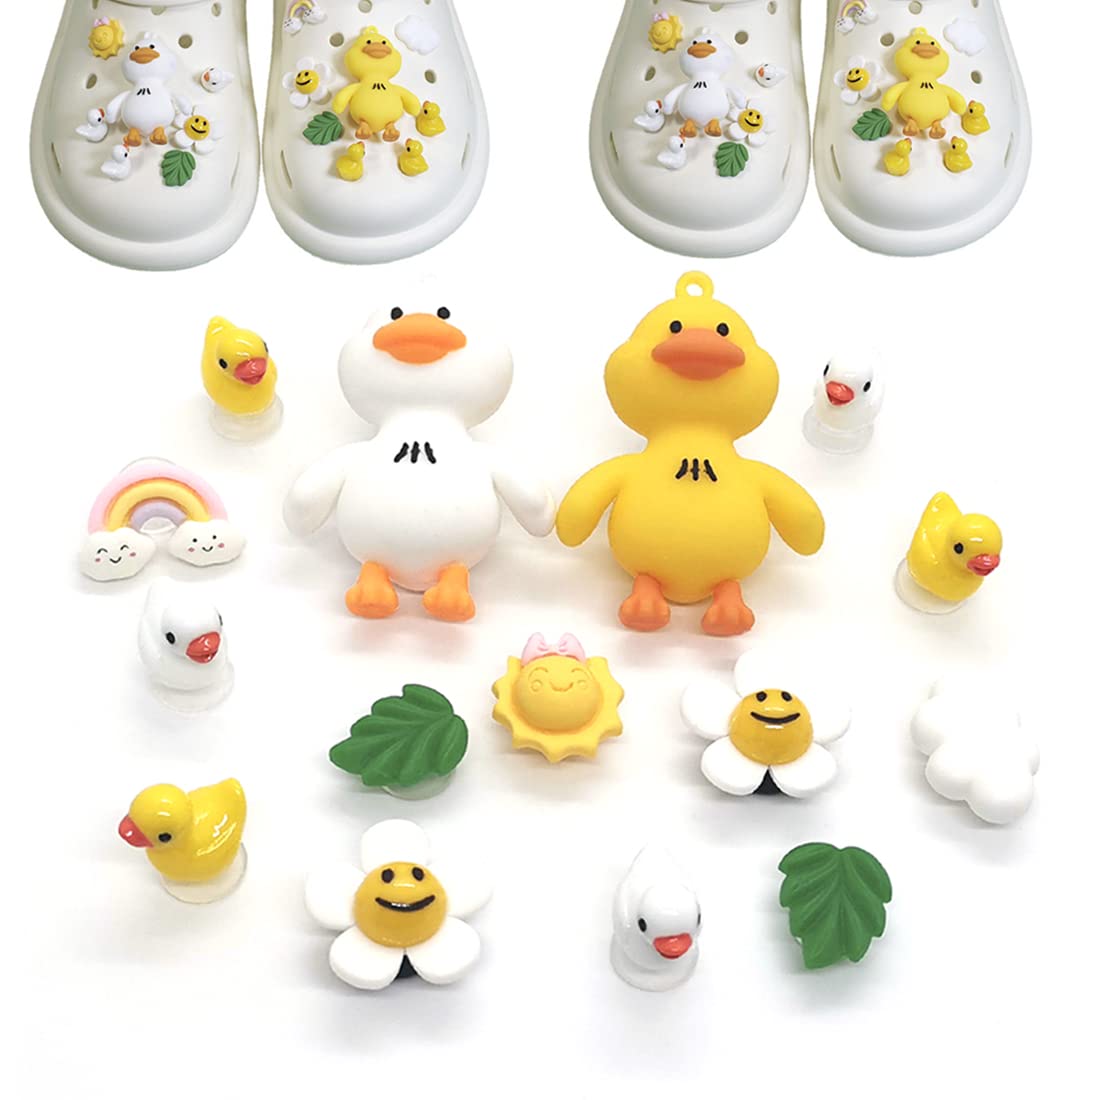 Cute 3D Duck Shoe Decoration Charms for Shoes with Holes, Funny Croc Charms, Hole Shoe Charms, Shoe Accessories for Boys and Girls